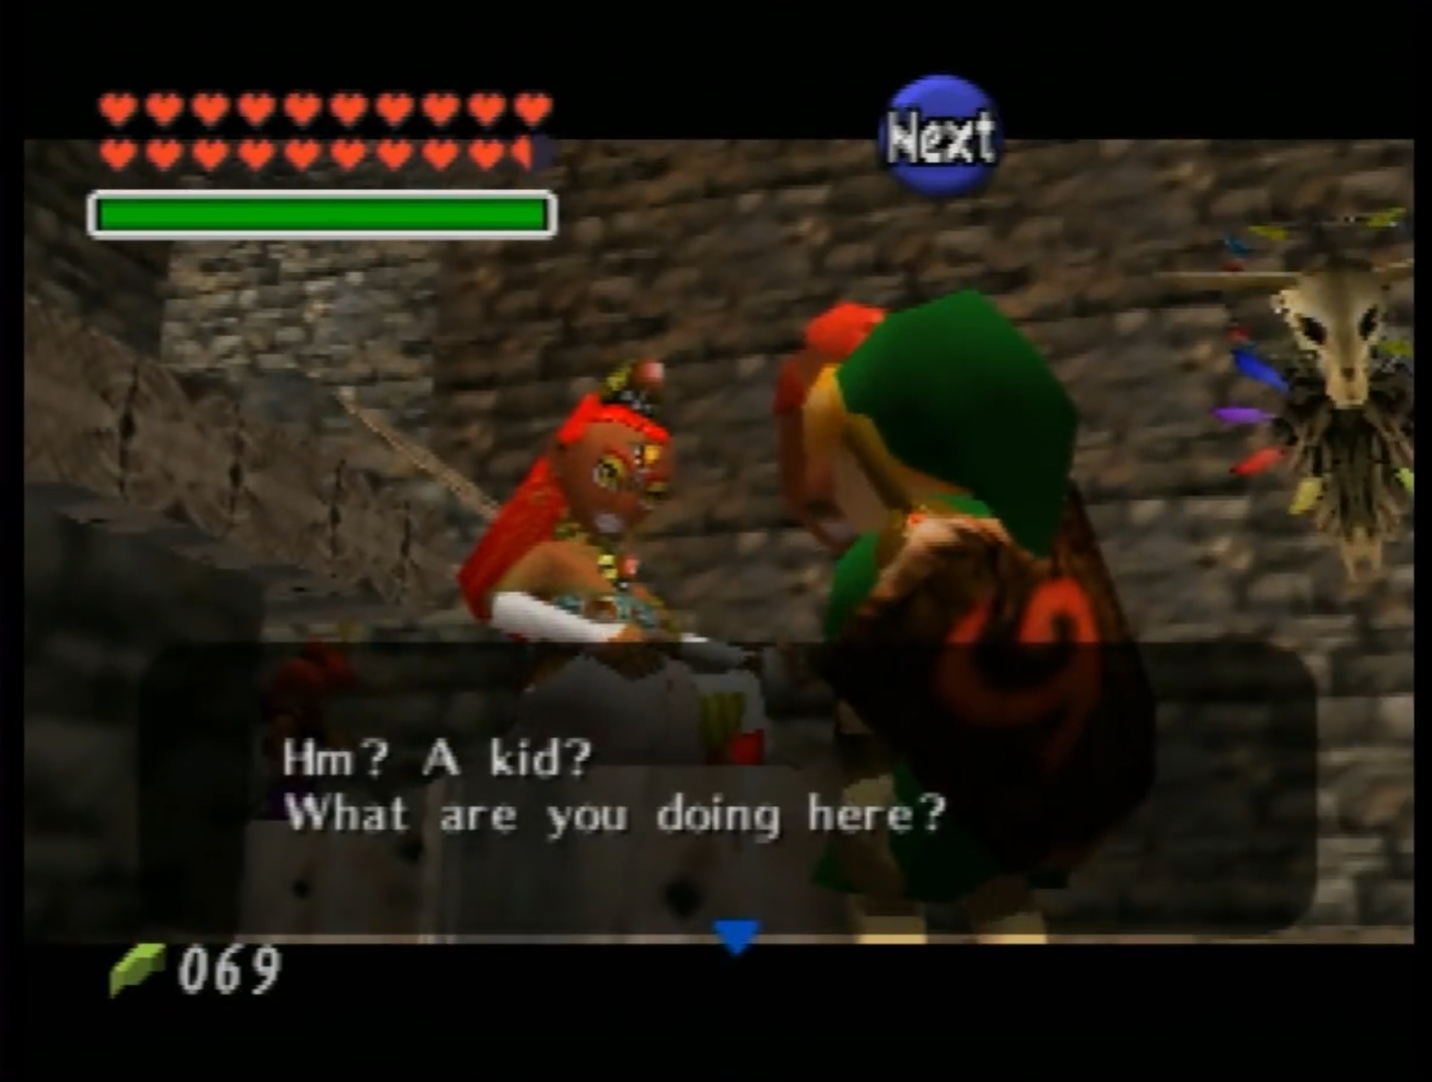 OoT] Did you know that Ocarina of Time has some hilarious piracy measures?  If the N64 detects your game is pirated, Zelda abandons you in the escape  from Ganon's castle, and has